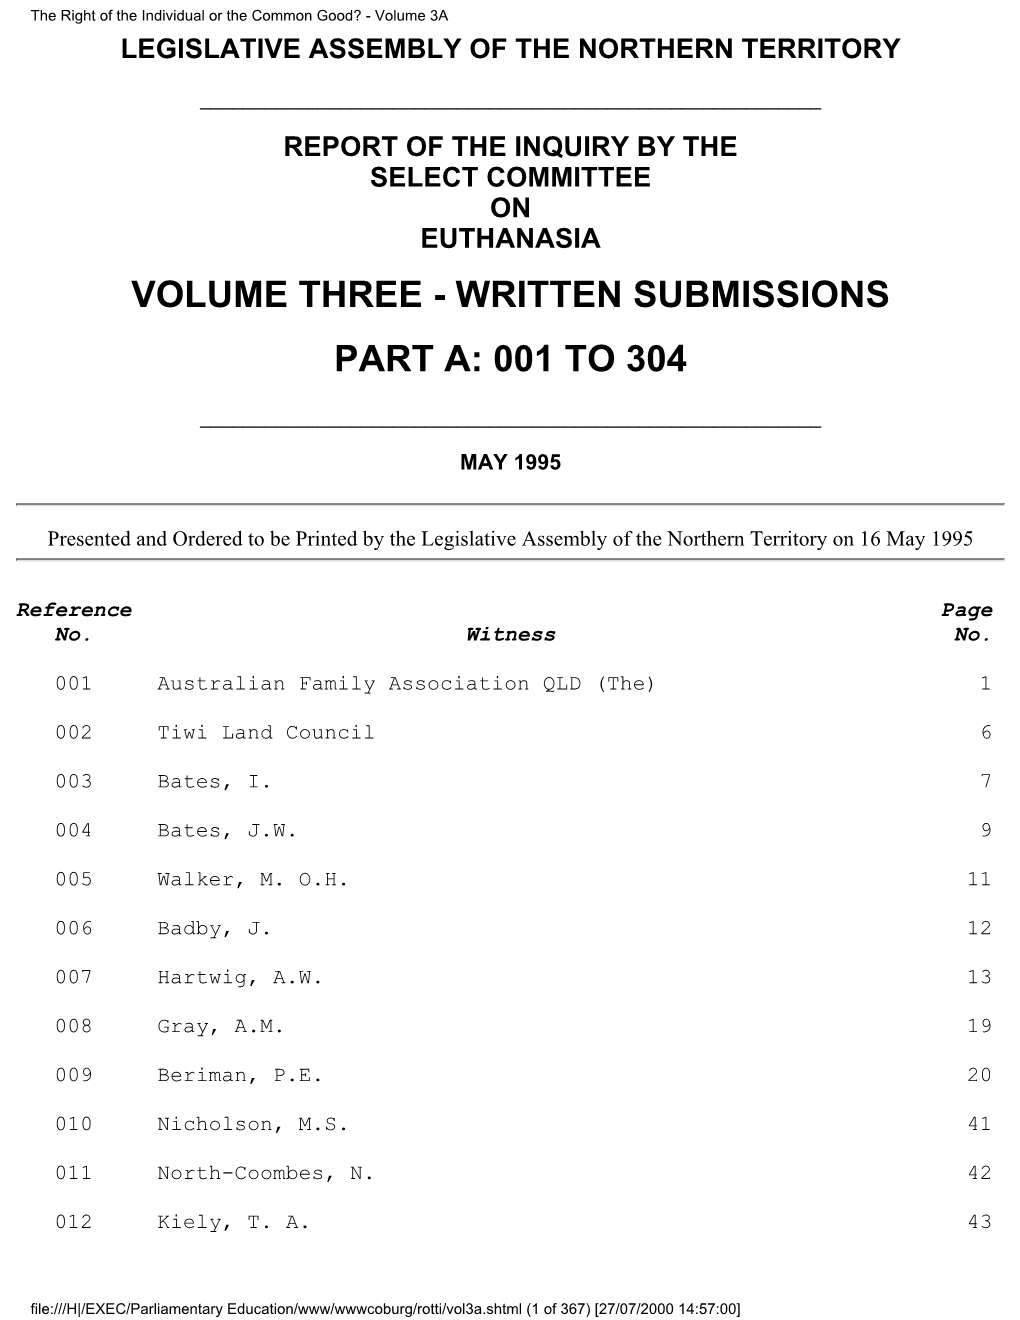 Volume 3A LEGISLATIVE ASSEMBLY of the NORTHERN TERRITORY